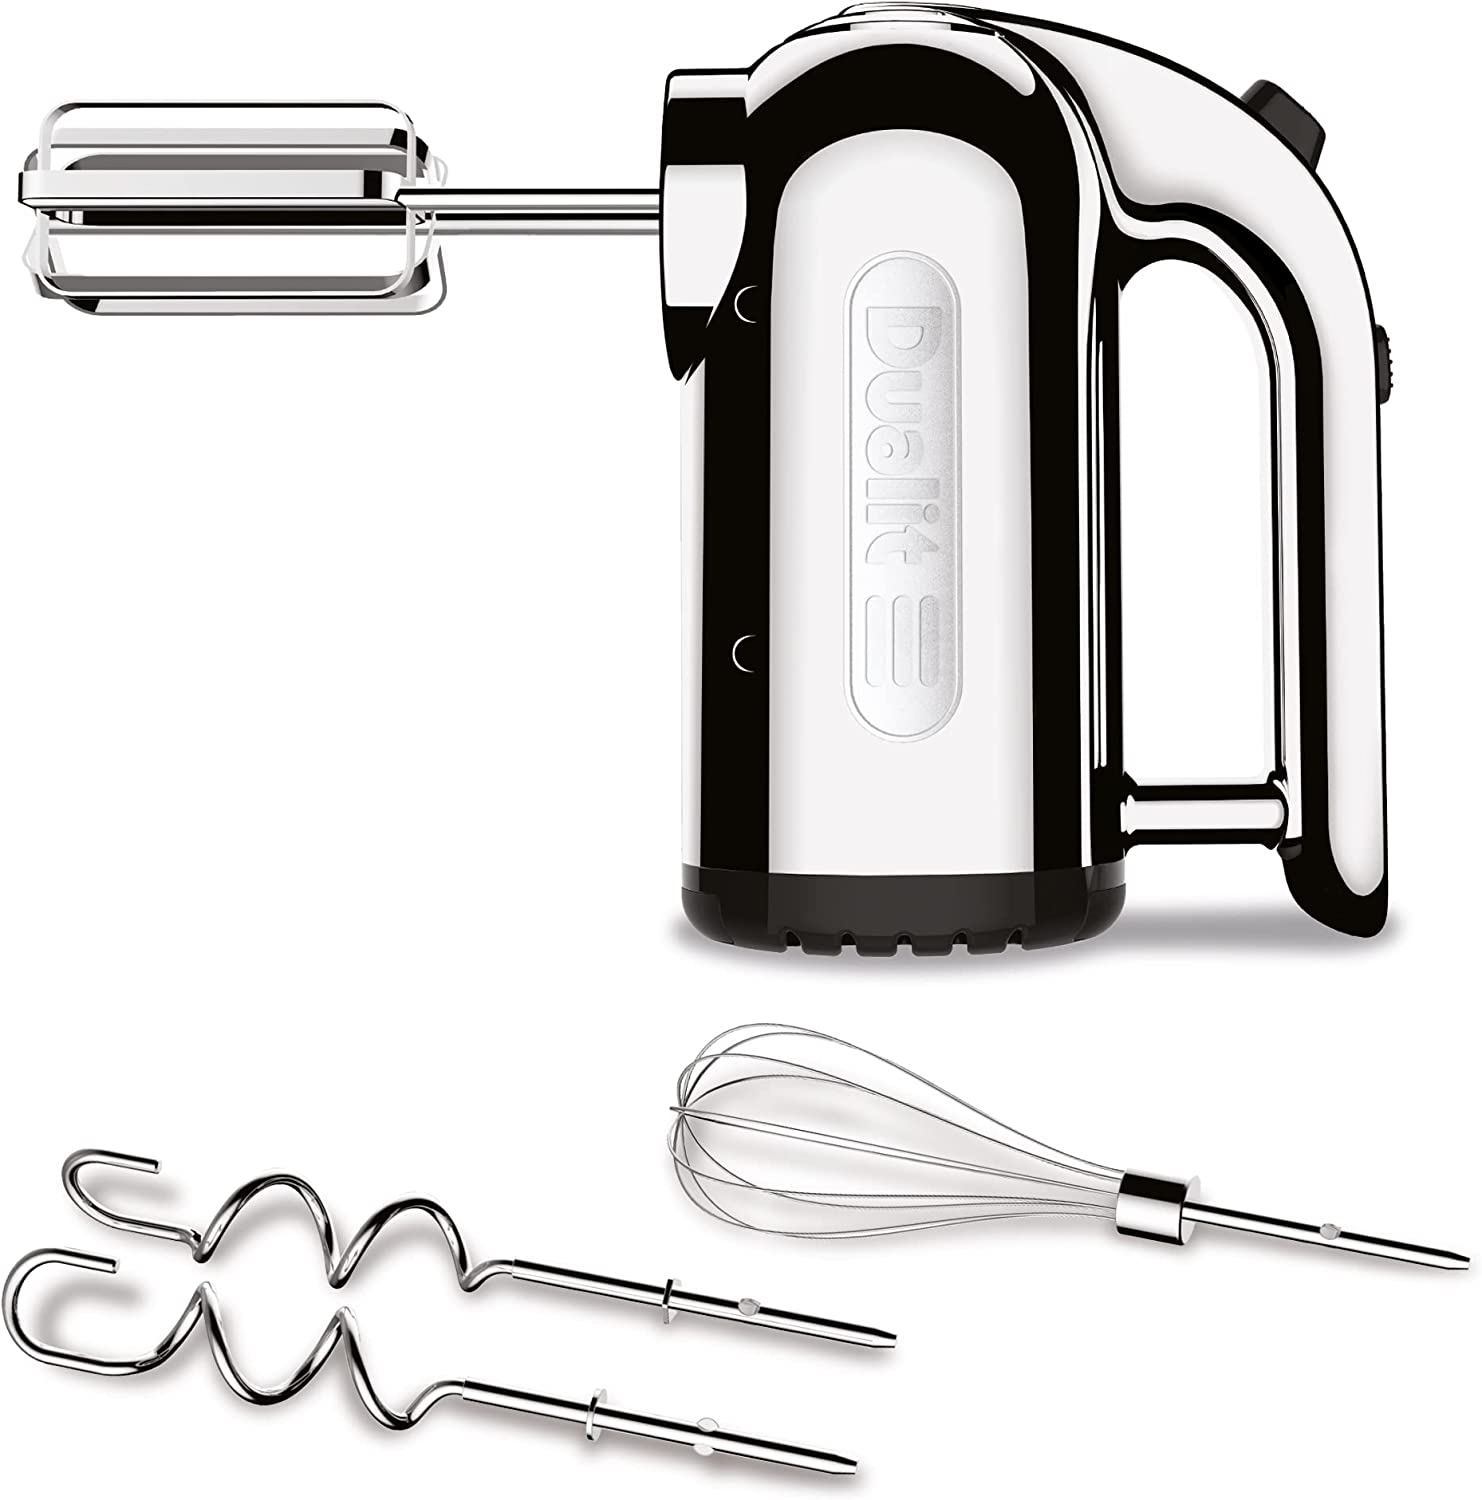 Dualit 4-Speed Professional Hand Mixer, Chrome Import To Shop ×Product customization General Description Gallery Reviews